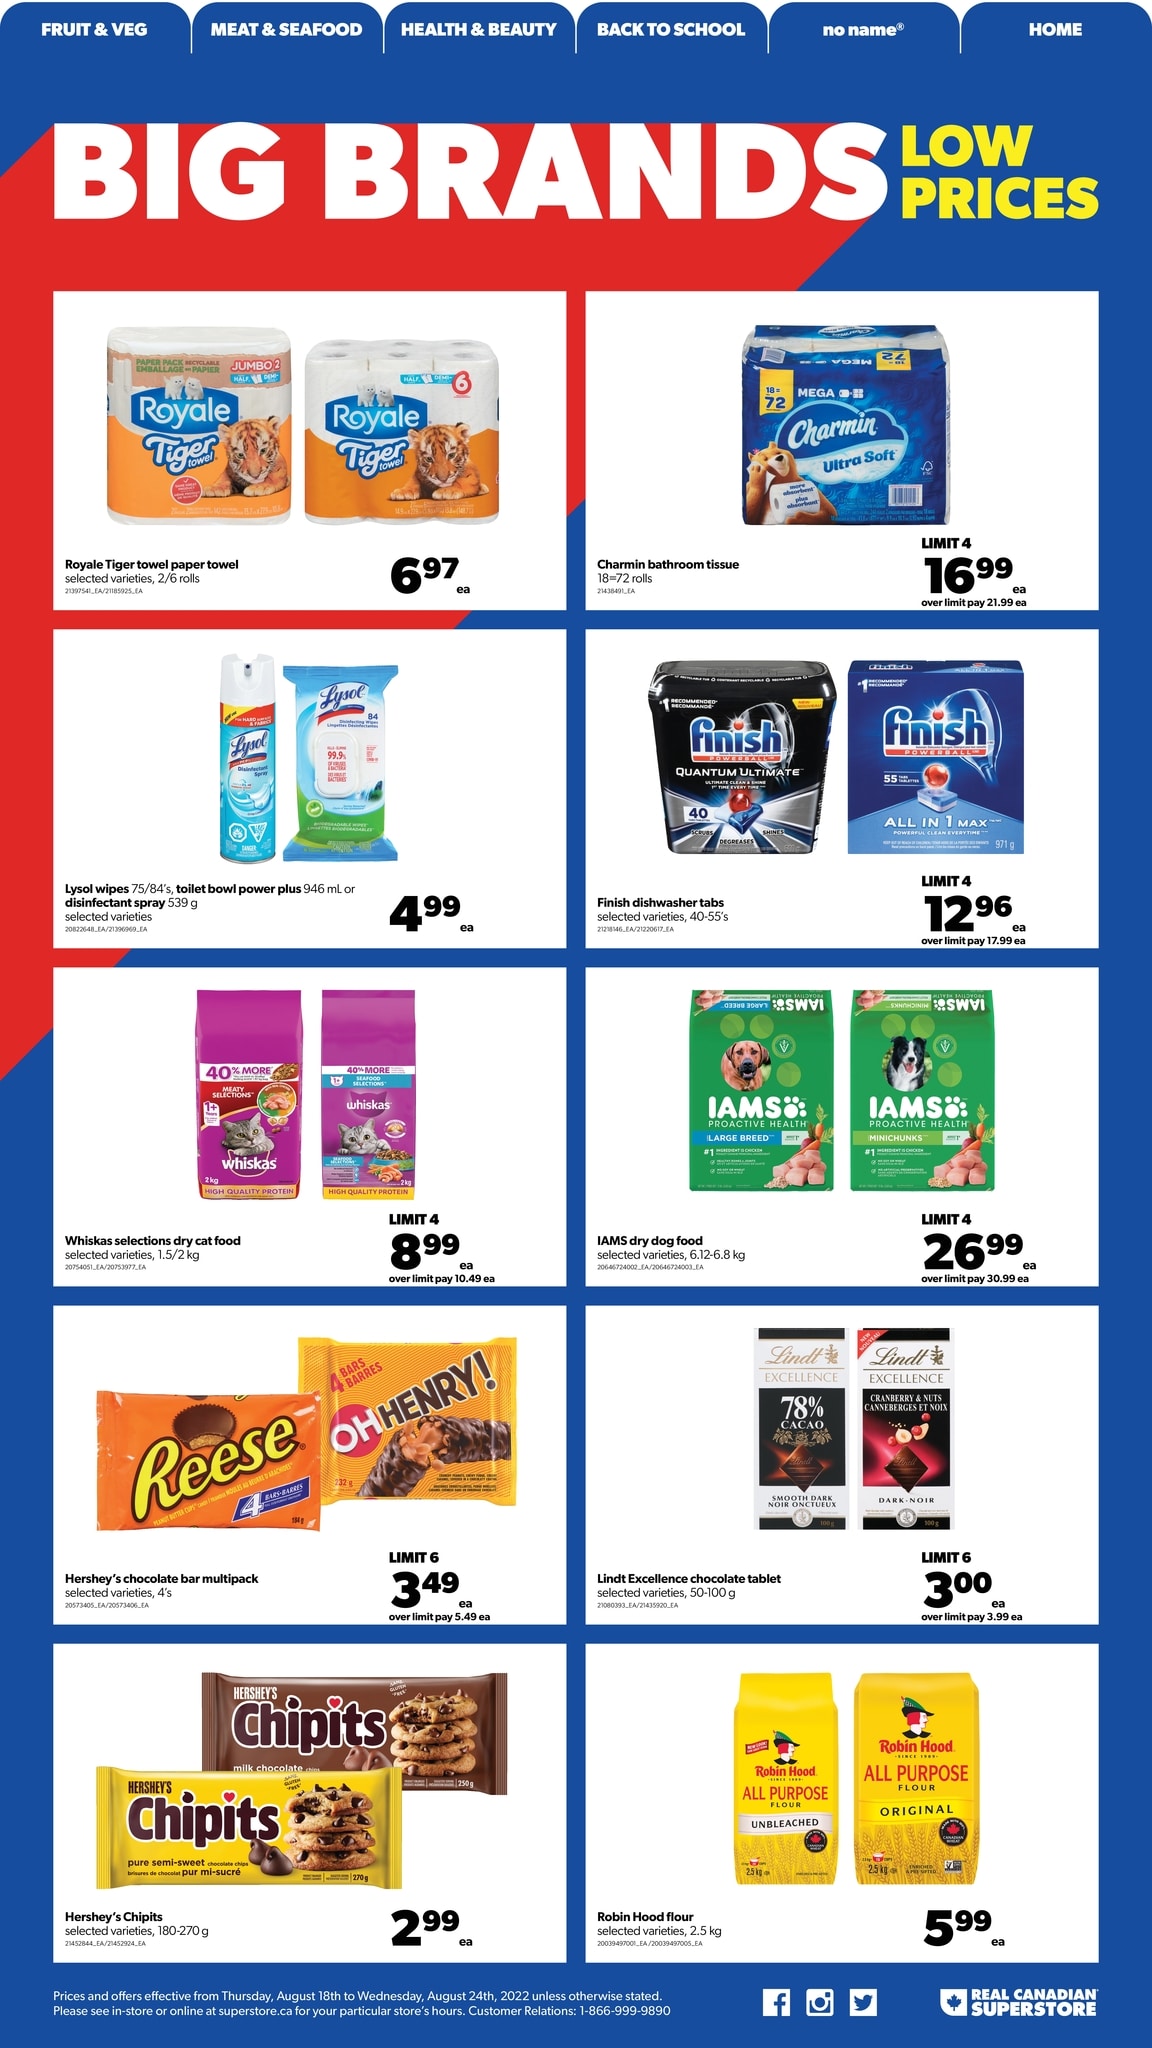 Real Canadian Superstore Western Canada - Weekly Flyer Specials - Page 4